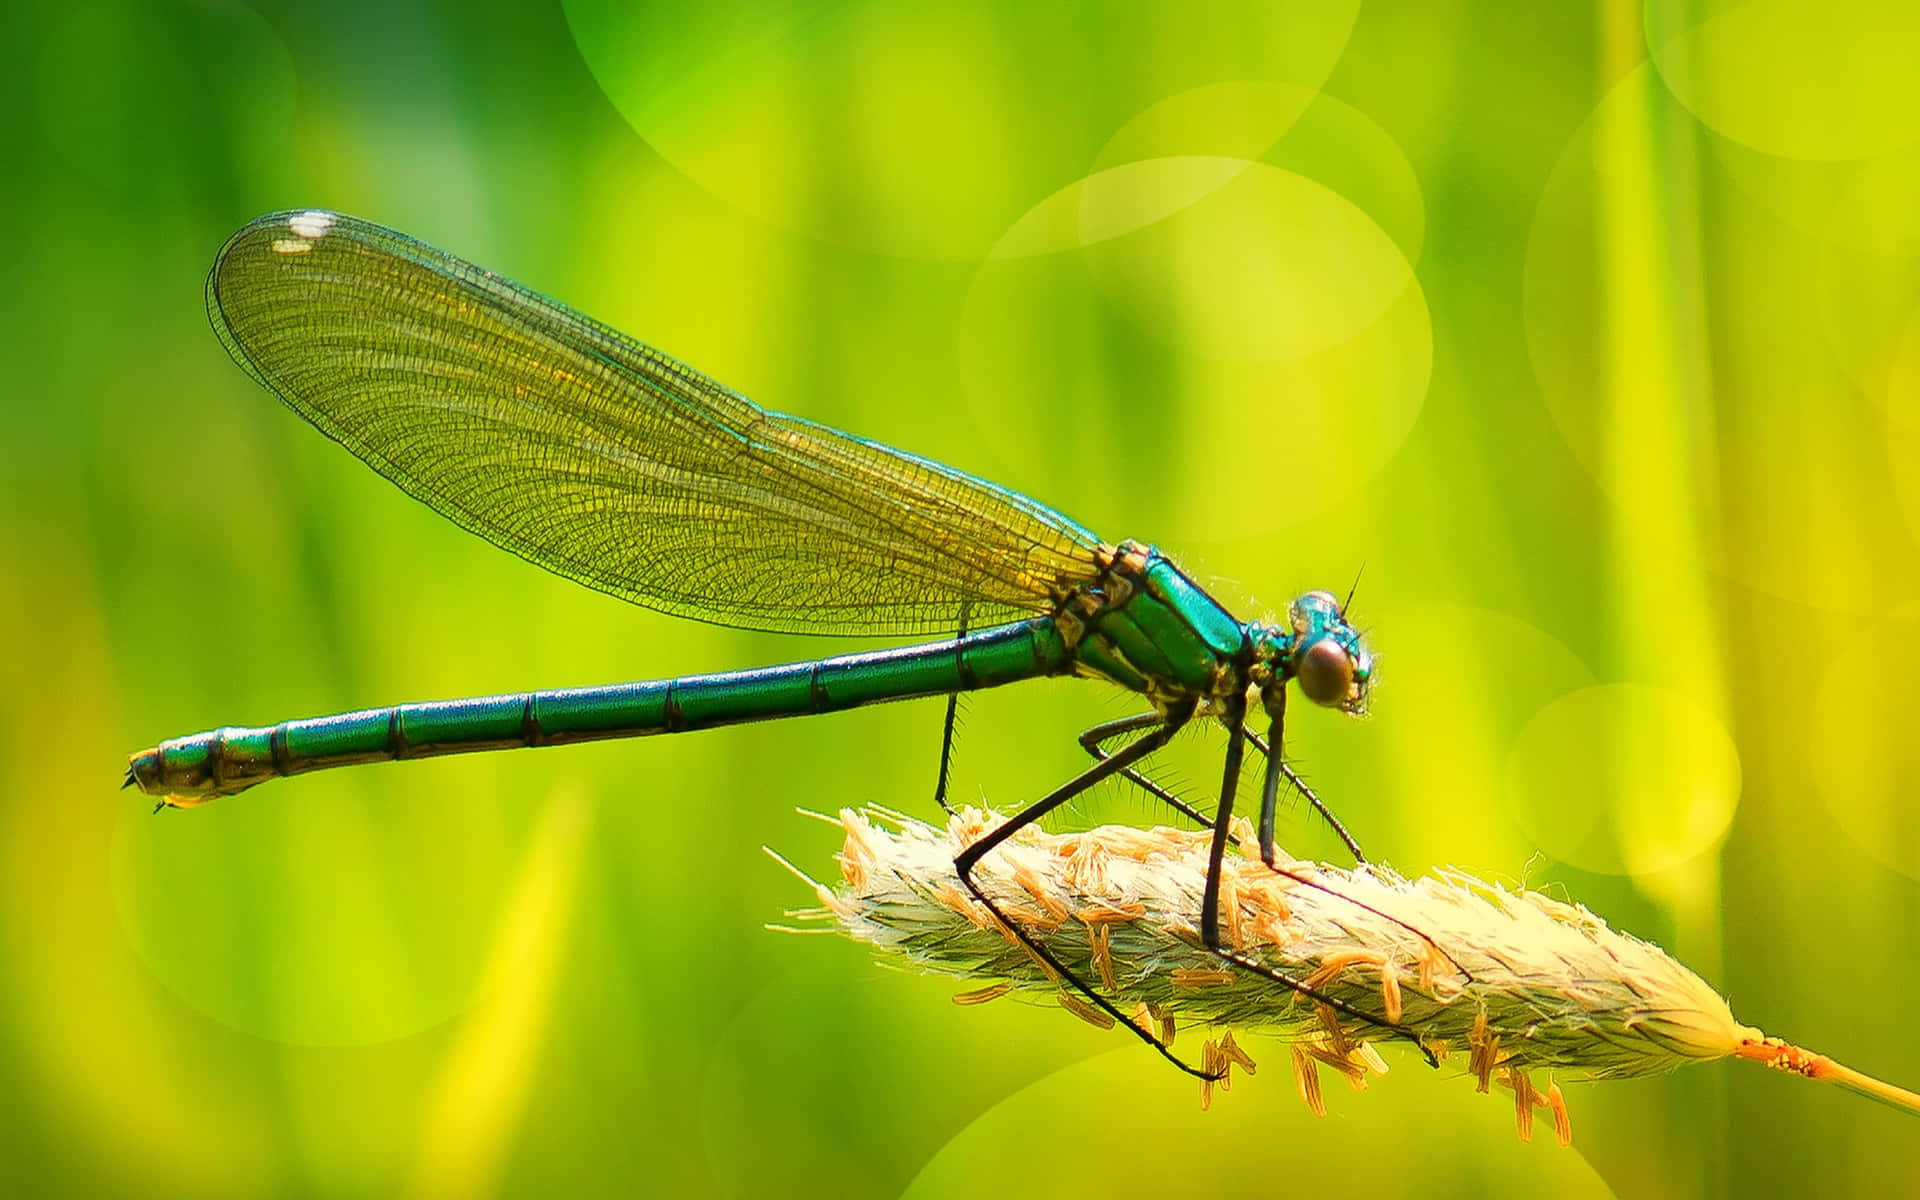 A Dragonfly Takes Glimpse of the Wilderness